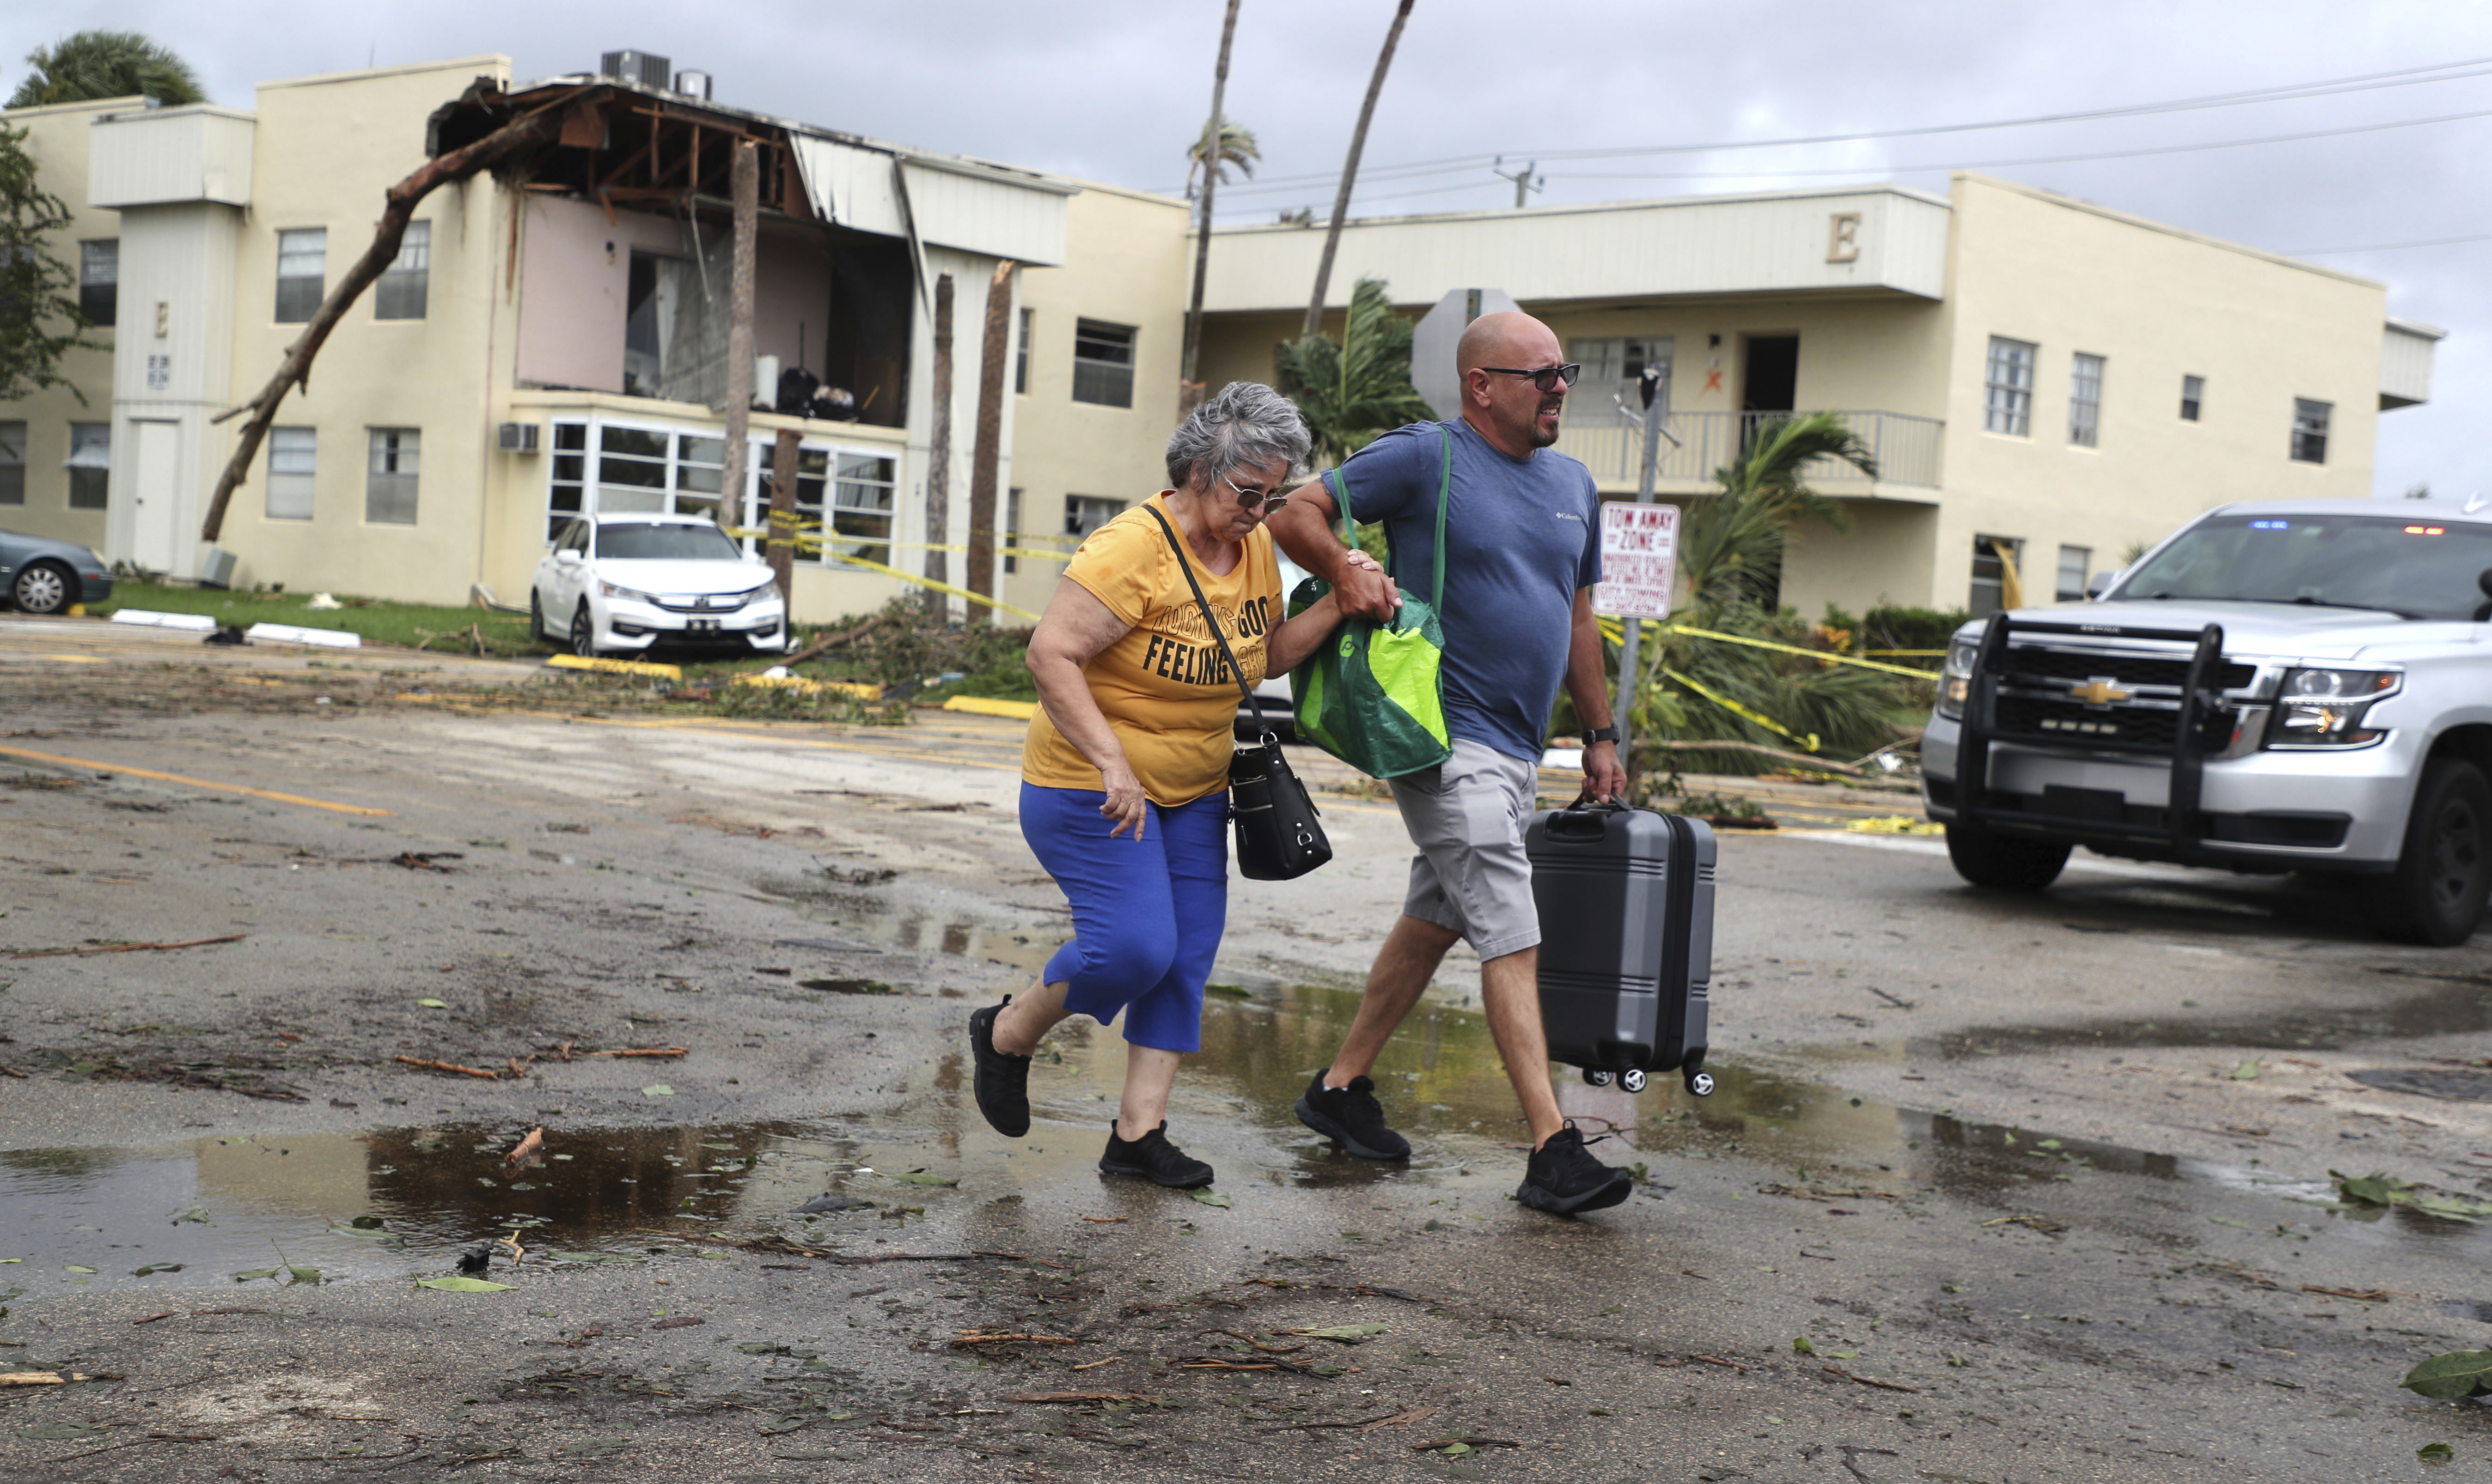 King Point resident Maria Esturilho is escorted by her son Tony Esturilho as they leave behind the damage from an apparent overnight tornado spawned from Hurricane Ian at Kings Point 55+ community in Delray Beach, Florida